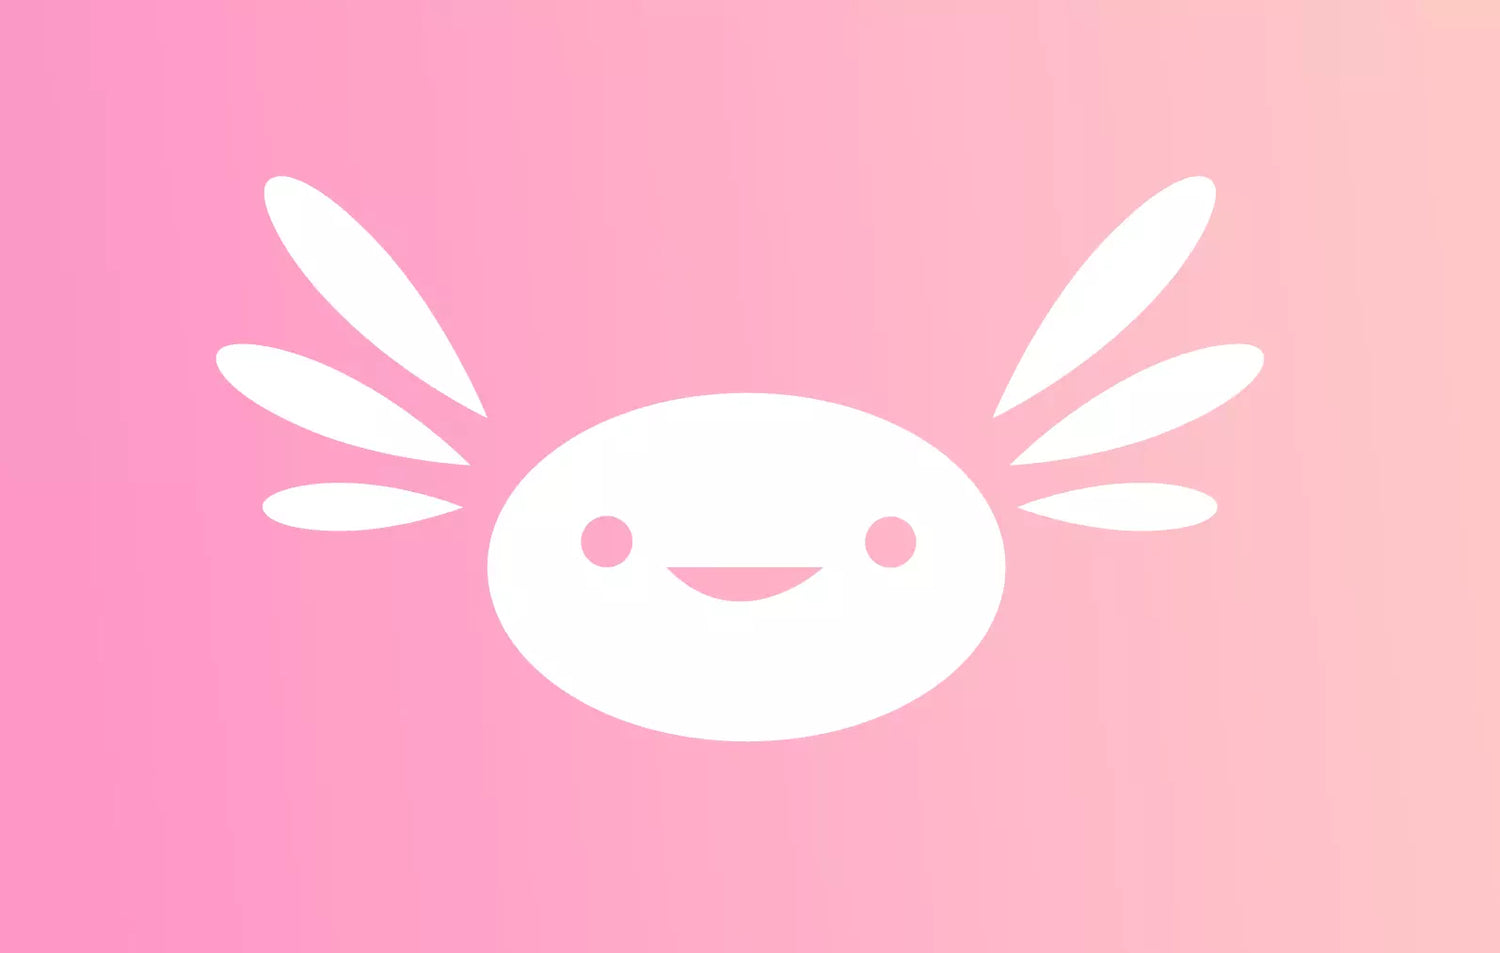 30+ Fun Axolotl Facts You Probably Didn't Know